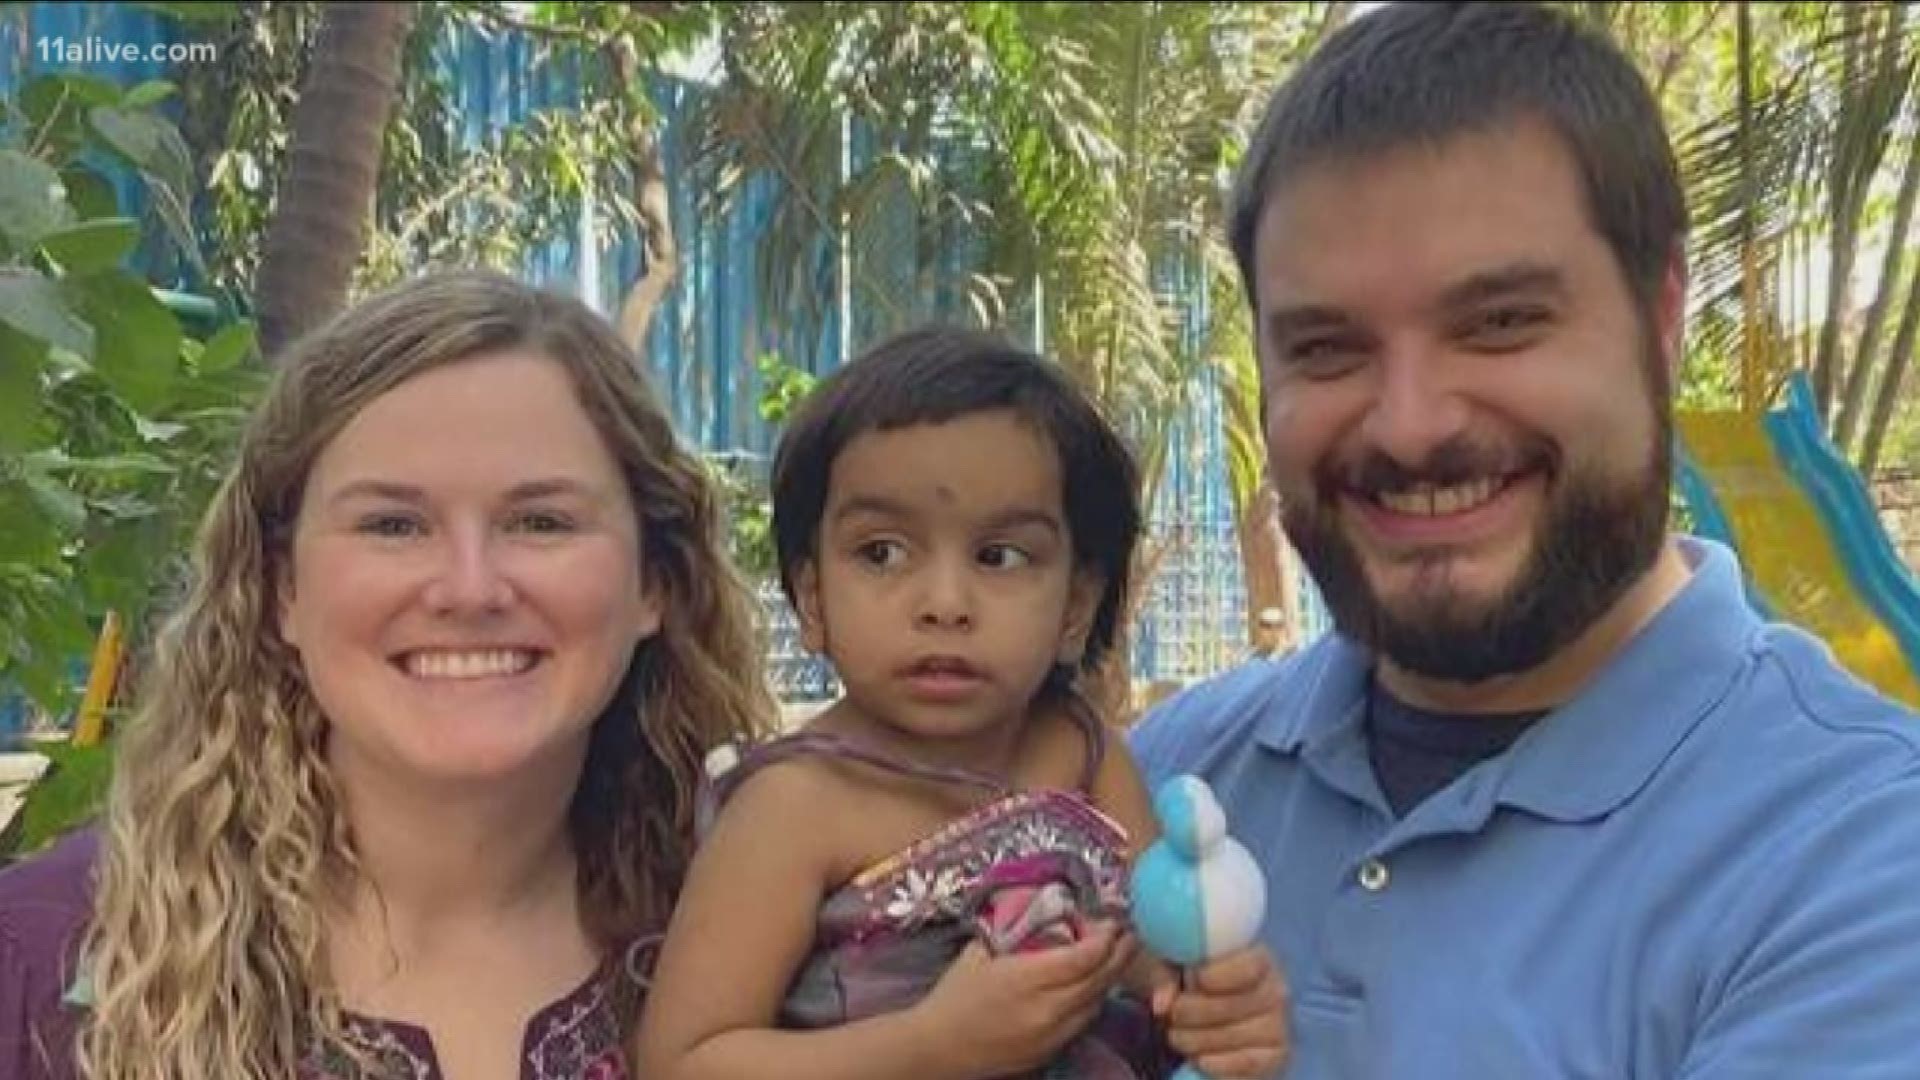 They went to India to bring home their new daughter. Now, they're trapped in the world's largest lockdown.